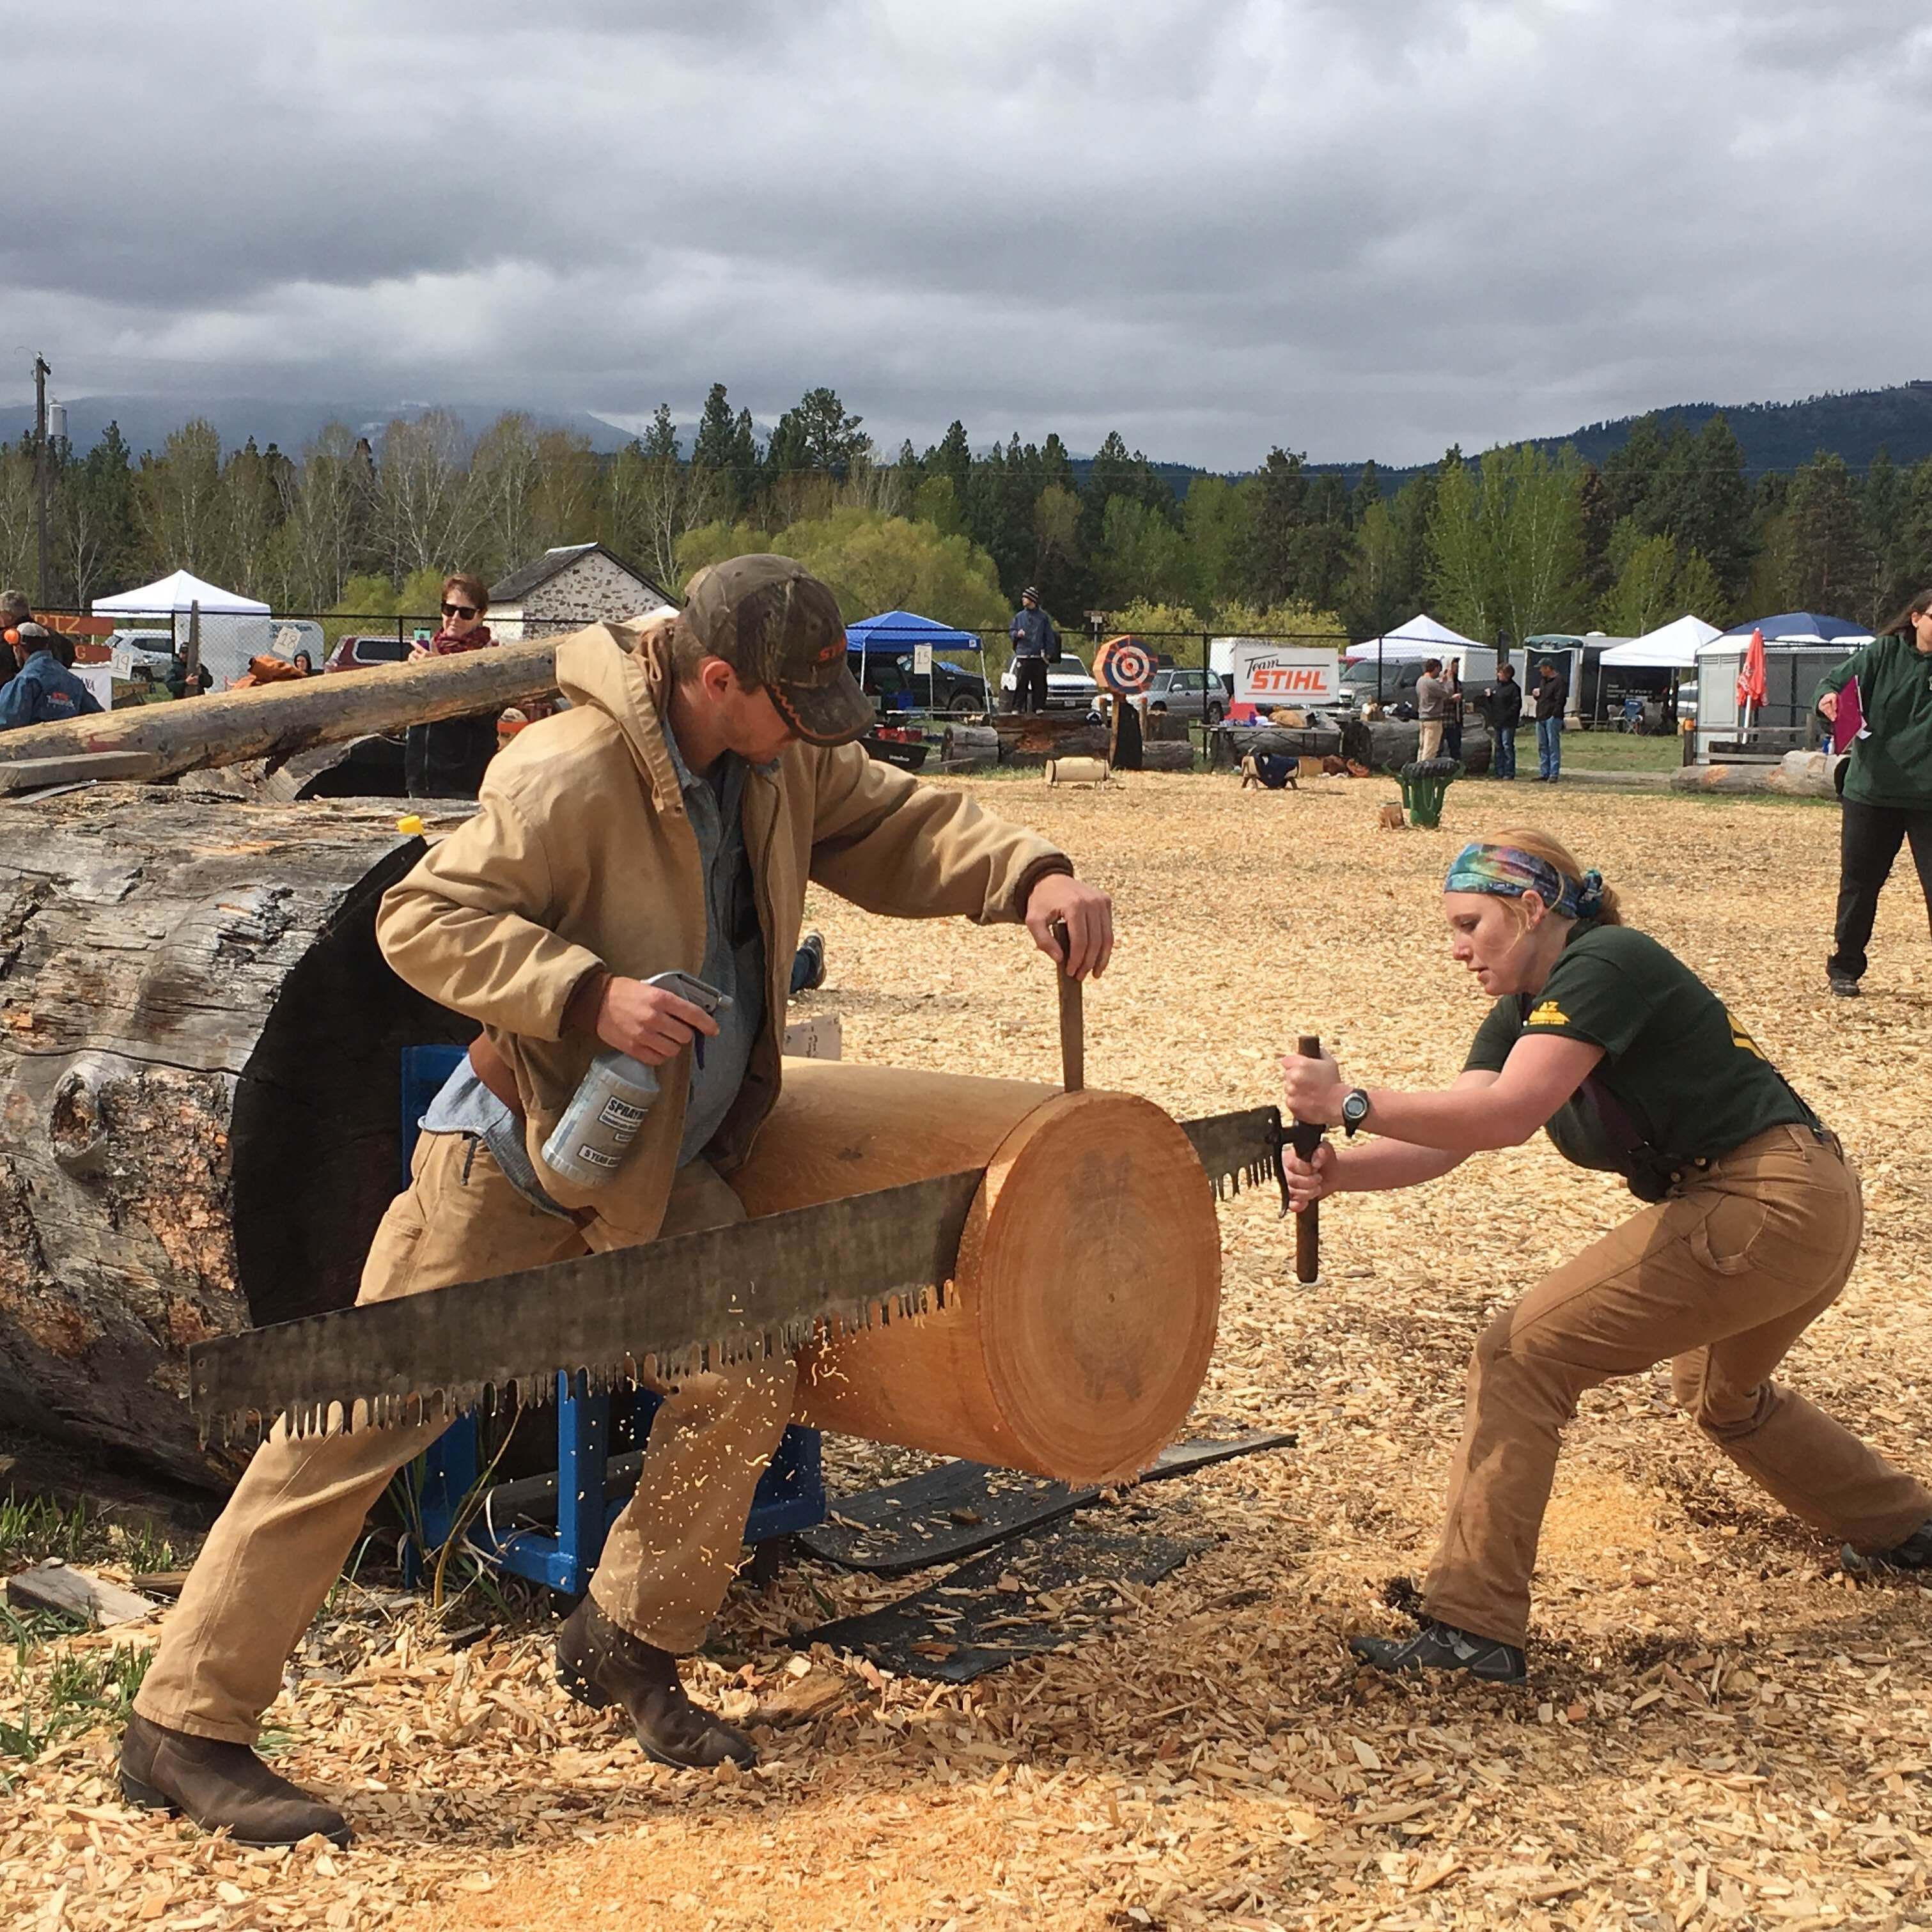 Lumberjack Contests are the Coolest College Extracurricular Atlas Obscura